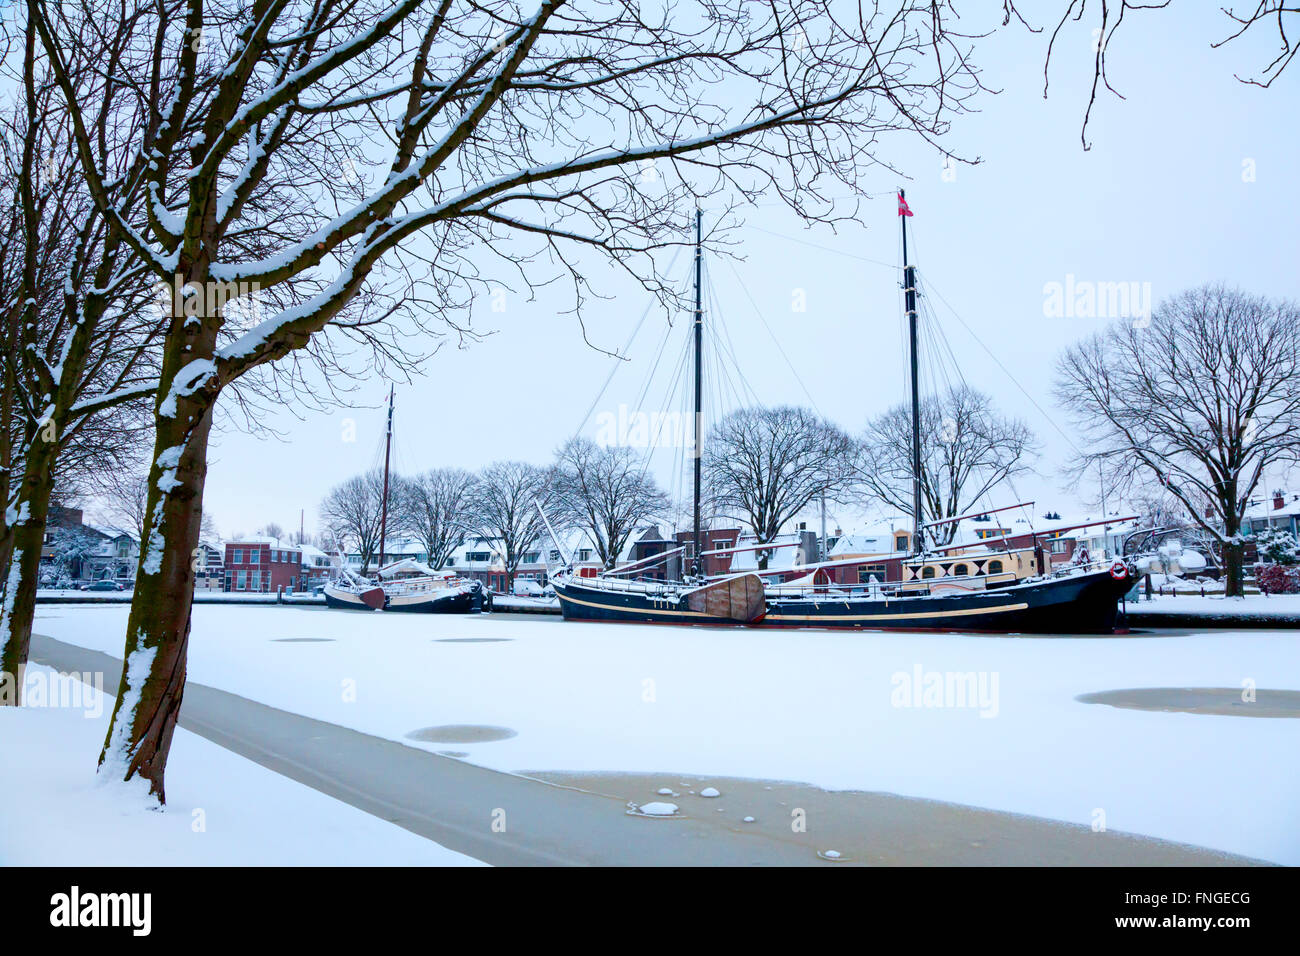 Classic boat in a frozen canal in winter in Leiden, Holland Stock Photo